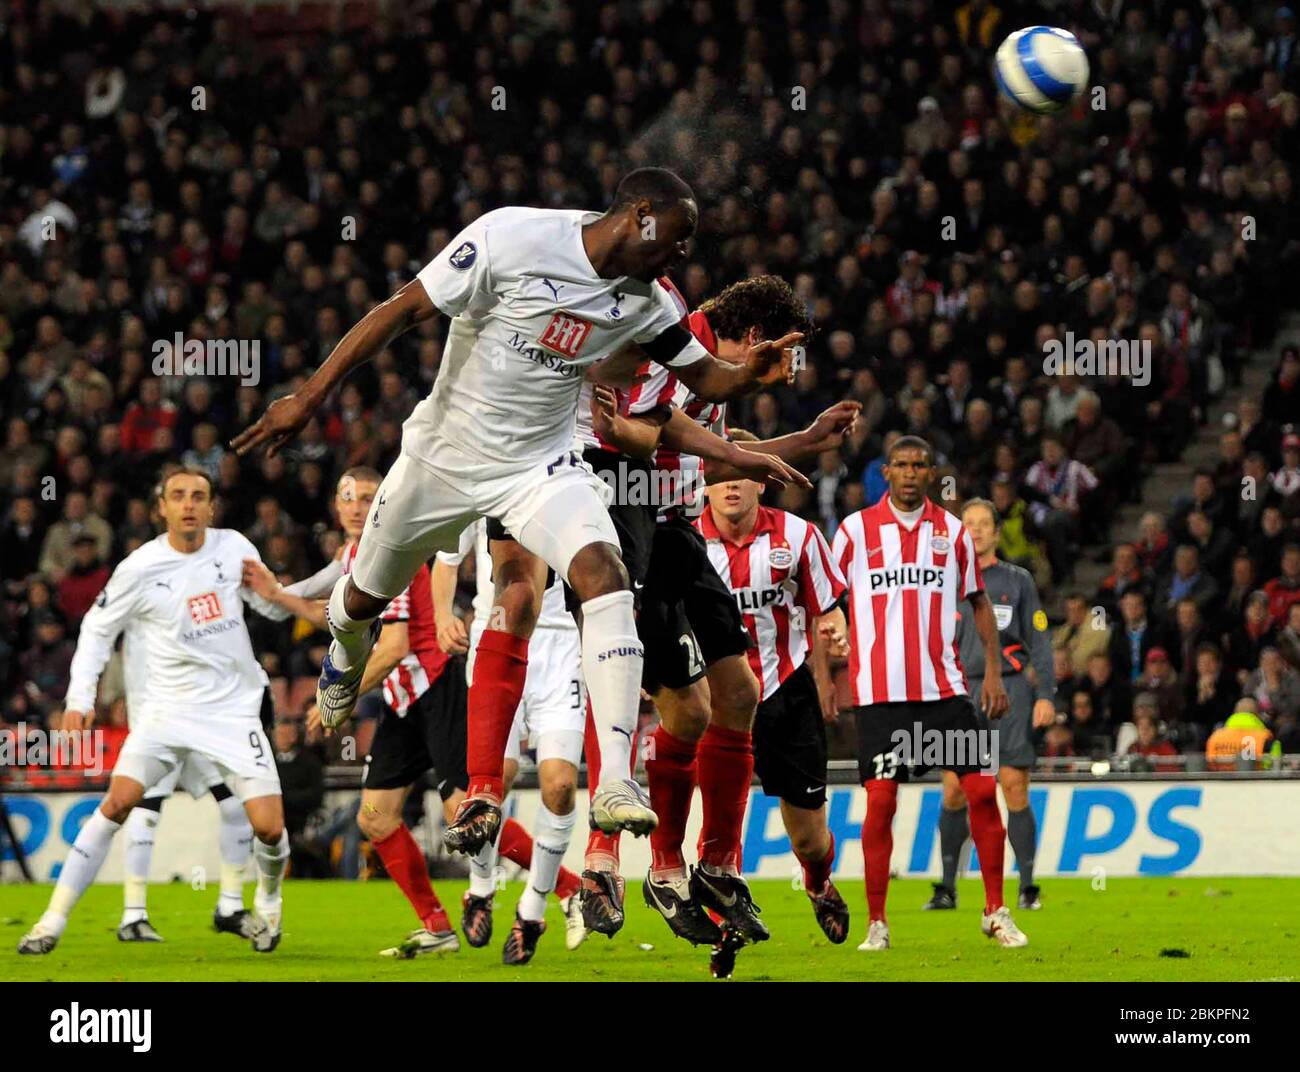 EINDHOVEN, NEDERLAND. MARCH 12: Ledley King (Spurs) has a header at goal, but it goes wide.  During UEFA Cup Round of 16 Second Leg between PSV Eindho Stock Photo